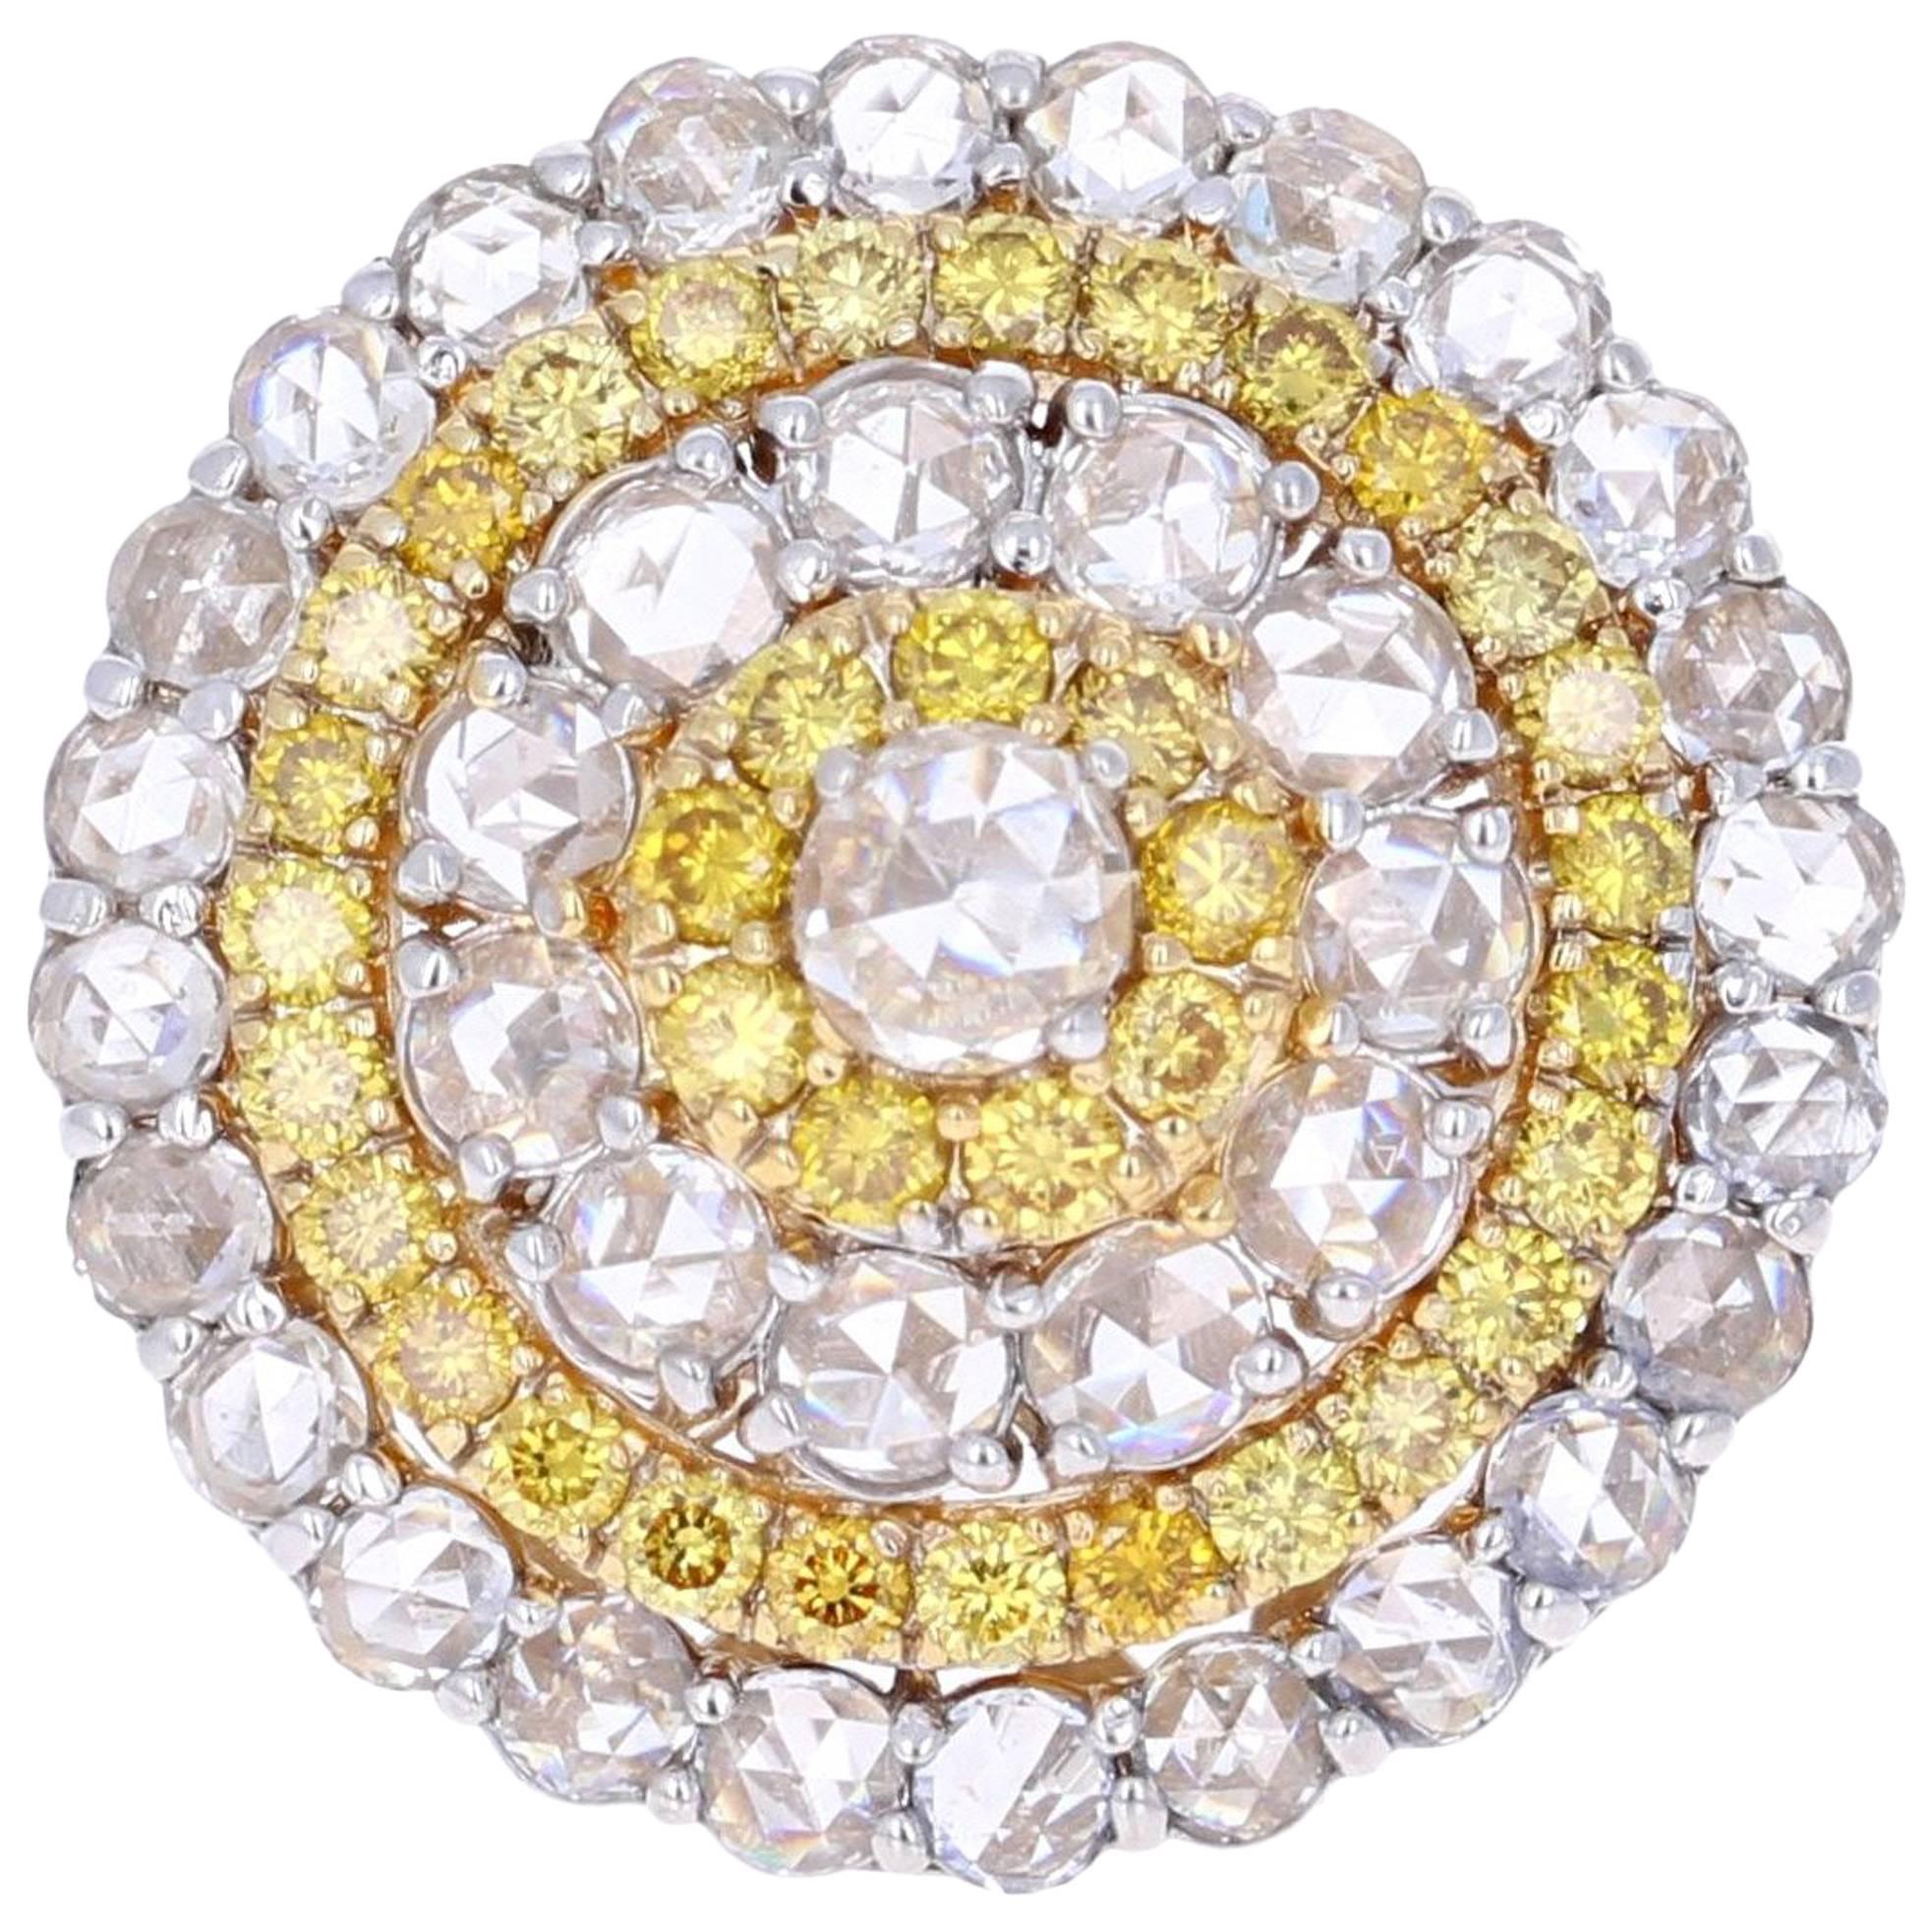 Elegance and beauty at its best - a real show stopper!   There are 36 Rose Cut Diamonds that weigh 1.94 carats clustered around the ring (Calrity: VS2 and Color: F).  There are also 36 Yellow Round Cut Diamonds that weigh 0.98 carats.  These are